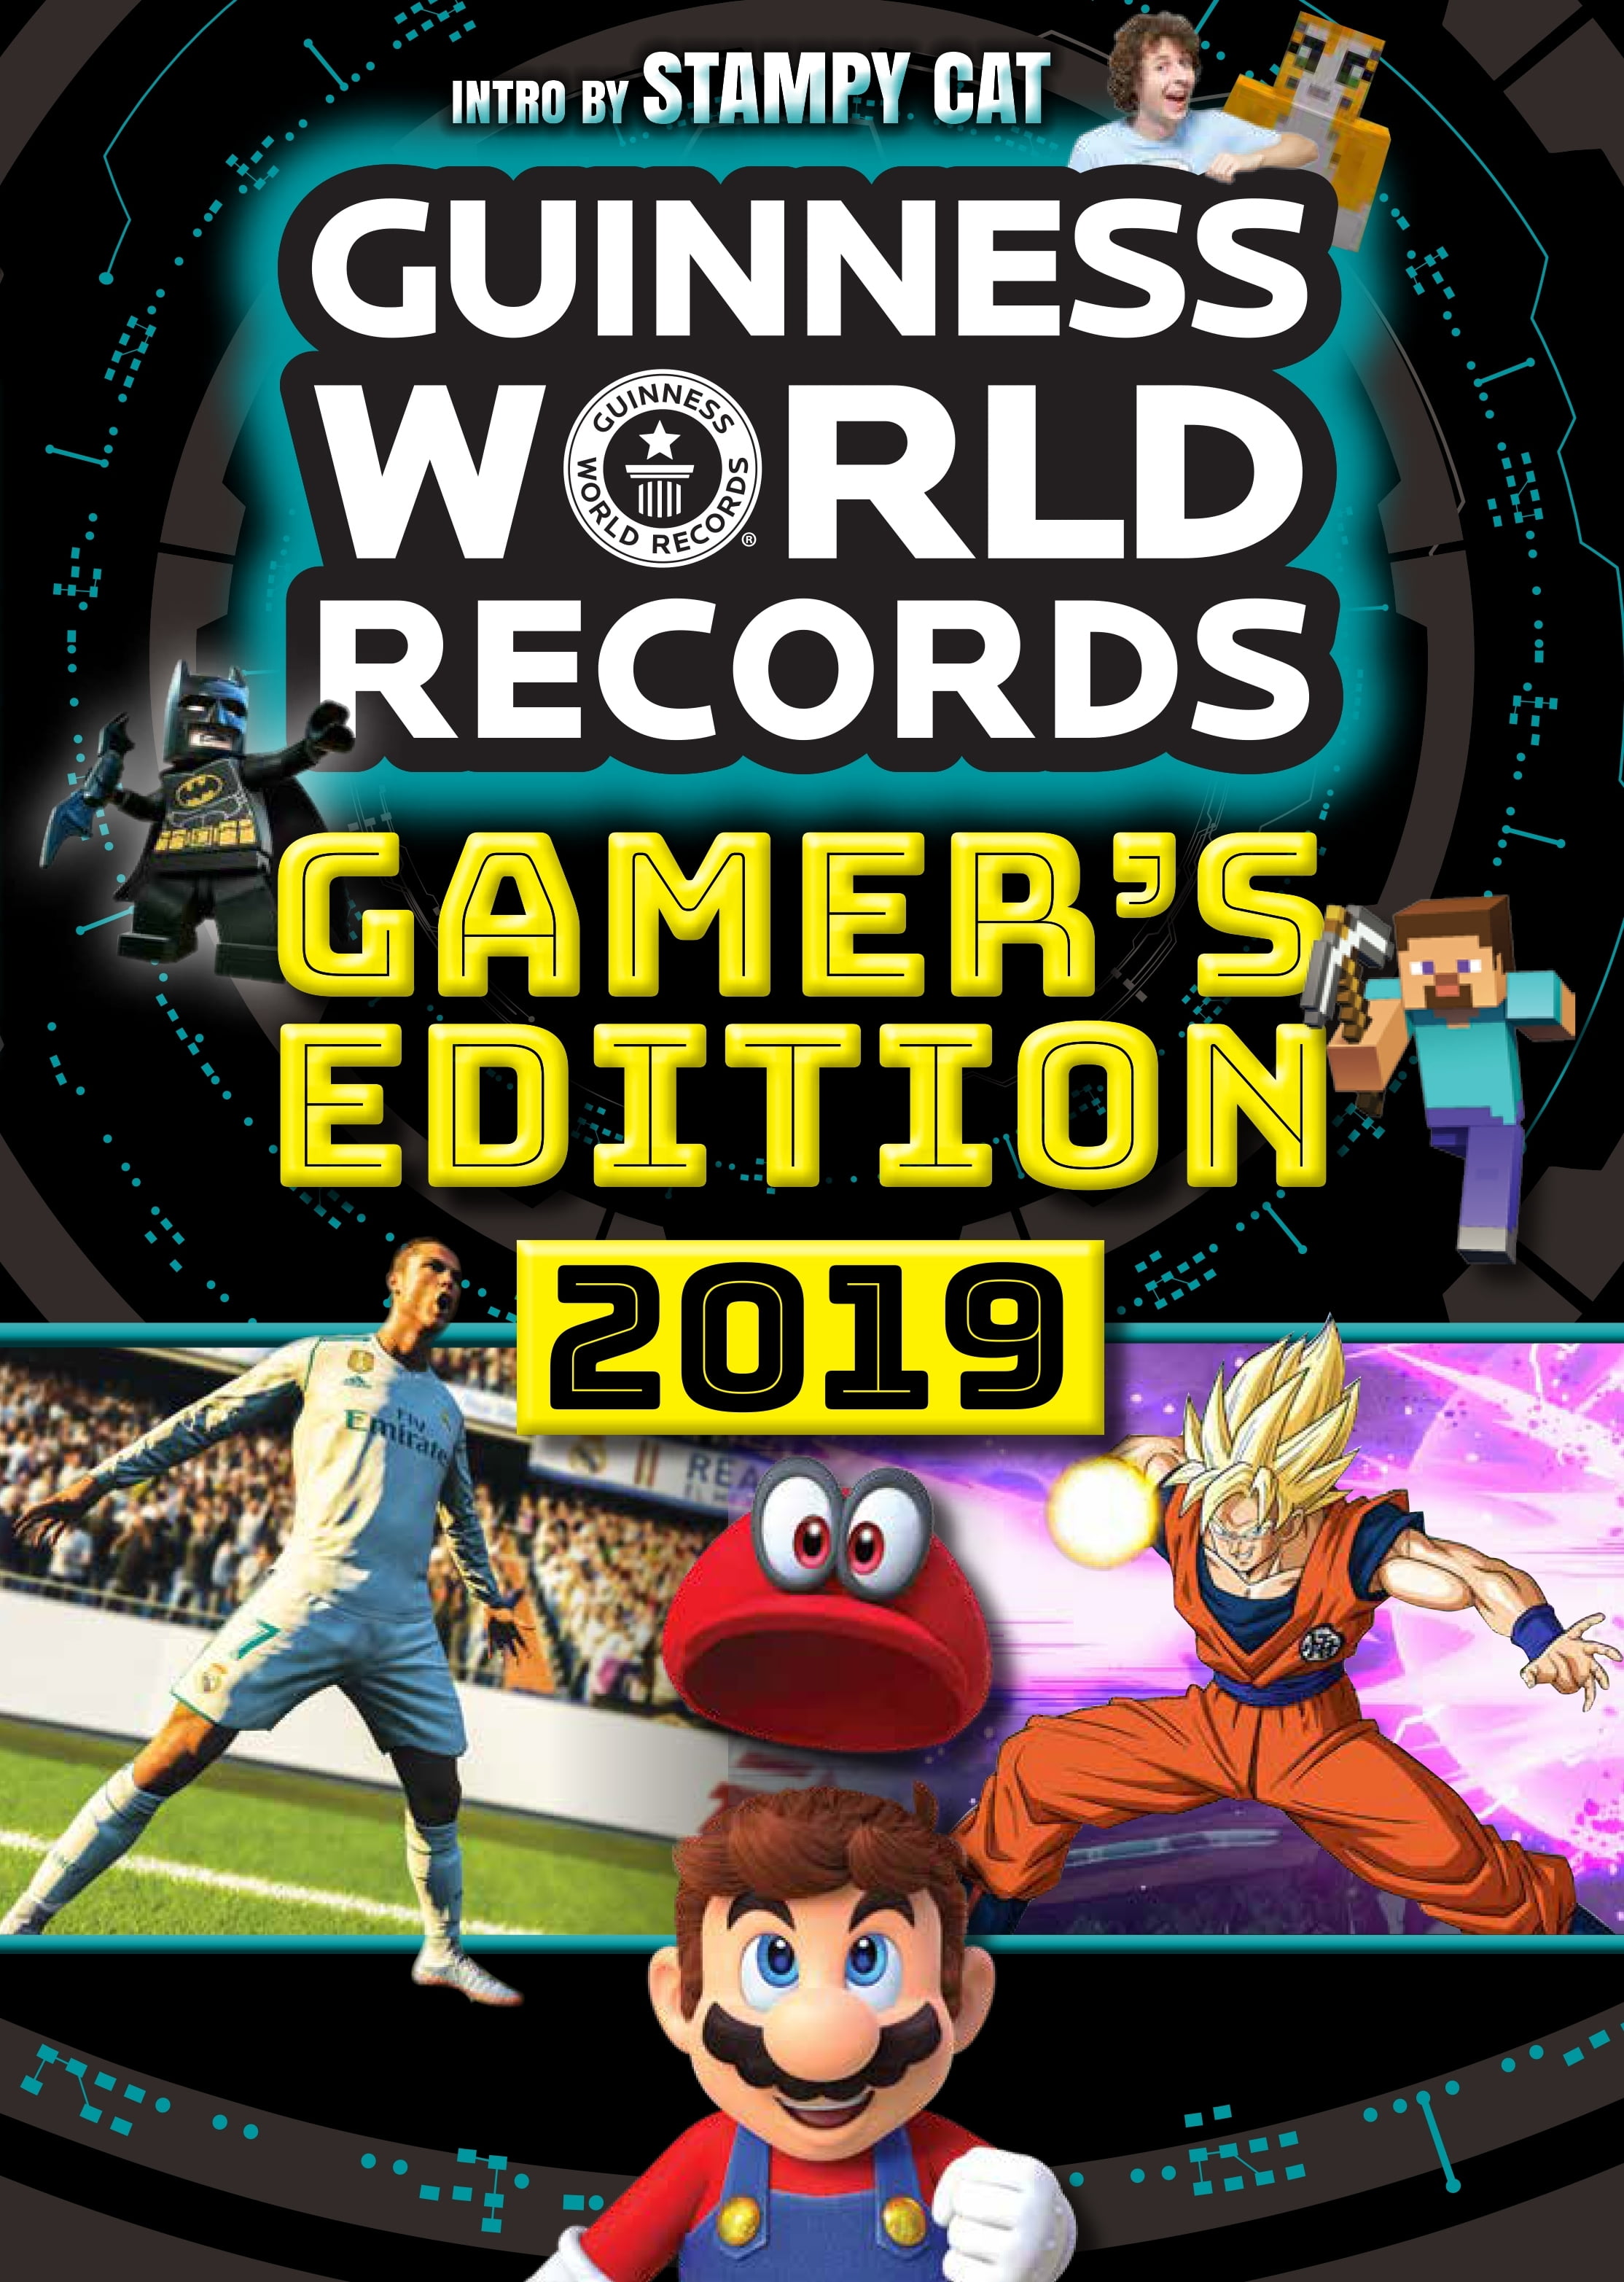 Buy Guinness World Records Gamers Edition 2019 Paperback Online At